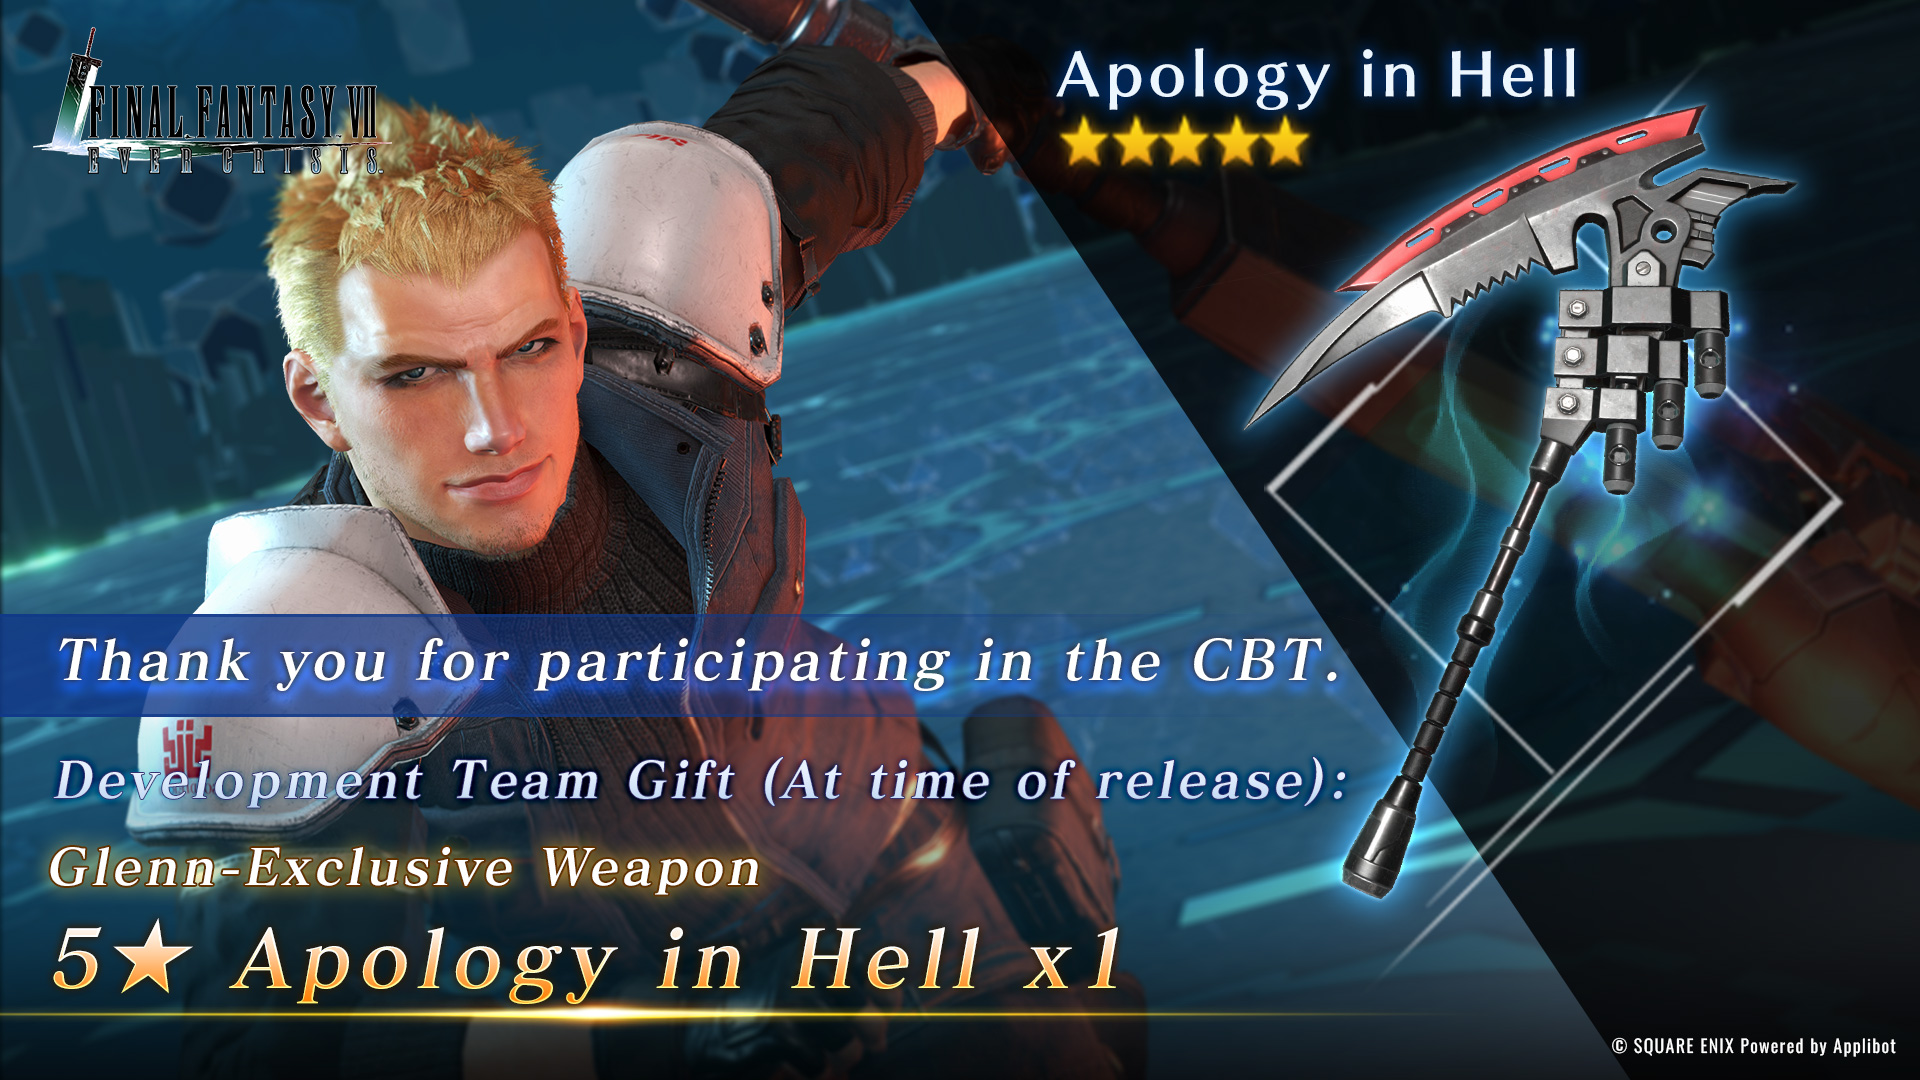 Thank you for participating in the CBT. Development Team Gift(At time of release): Glenn-Exclusive Weapon 5★ Apology in Hell x1